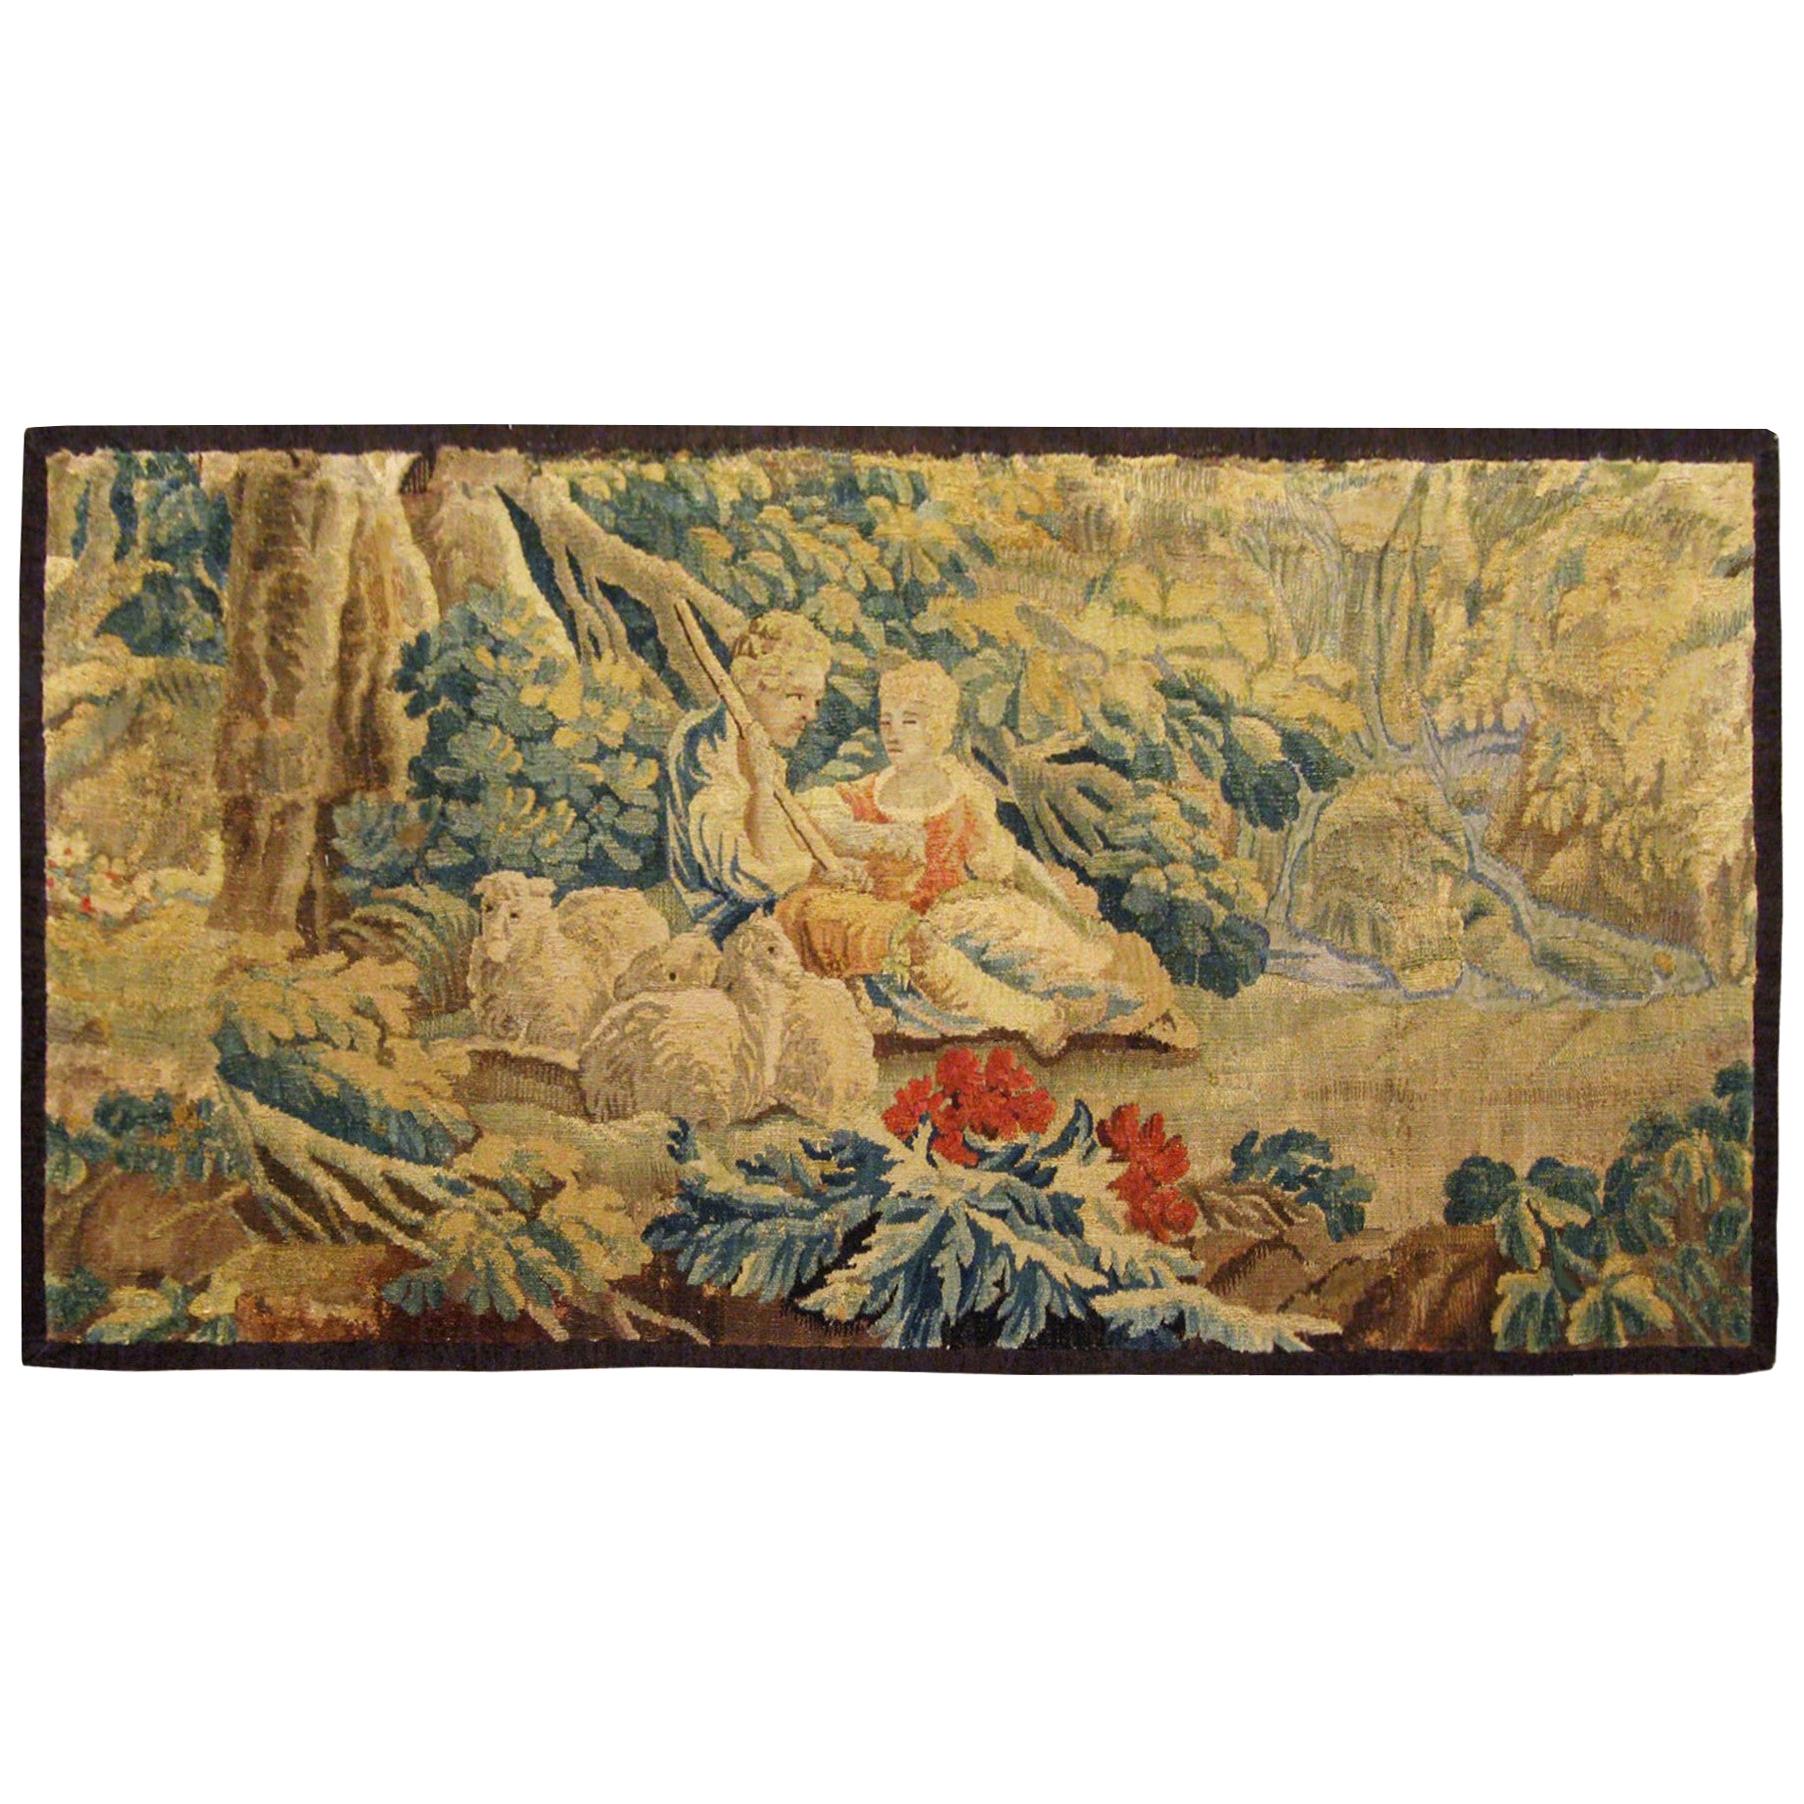 18th Century French Pastoral Landscape Tapestry, with Shepherds and Their Sheep